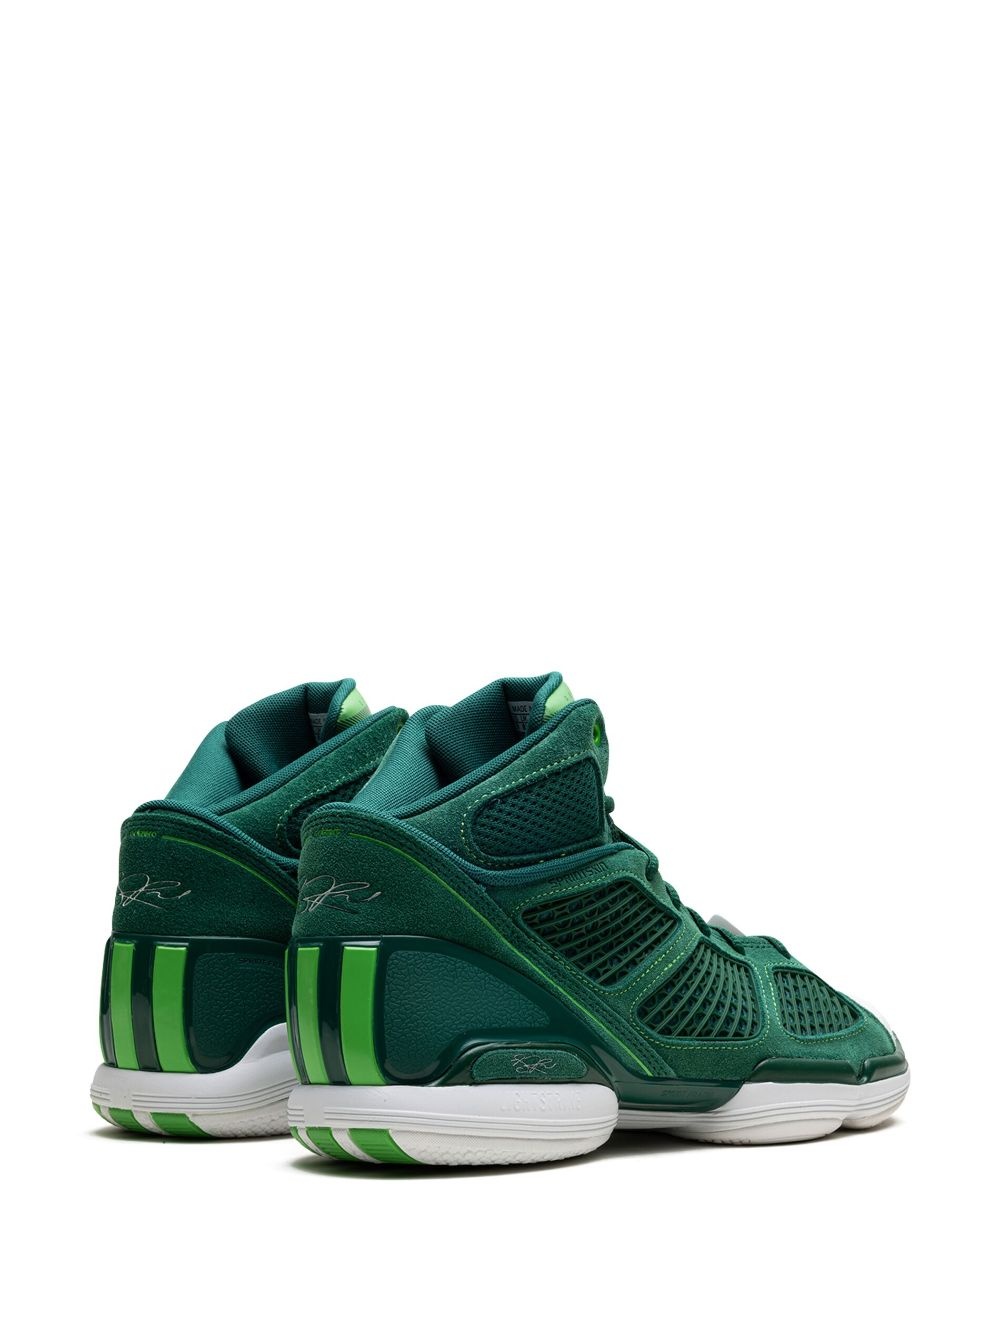 D Rose 1.5 "St. Patrick's Day (2022)" sneakers - 3